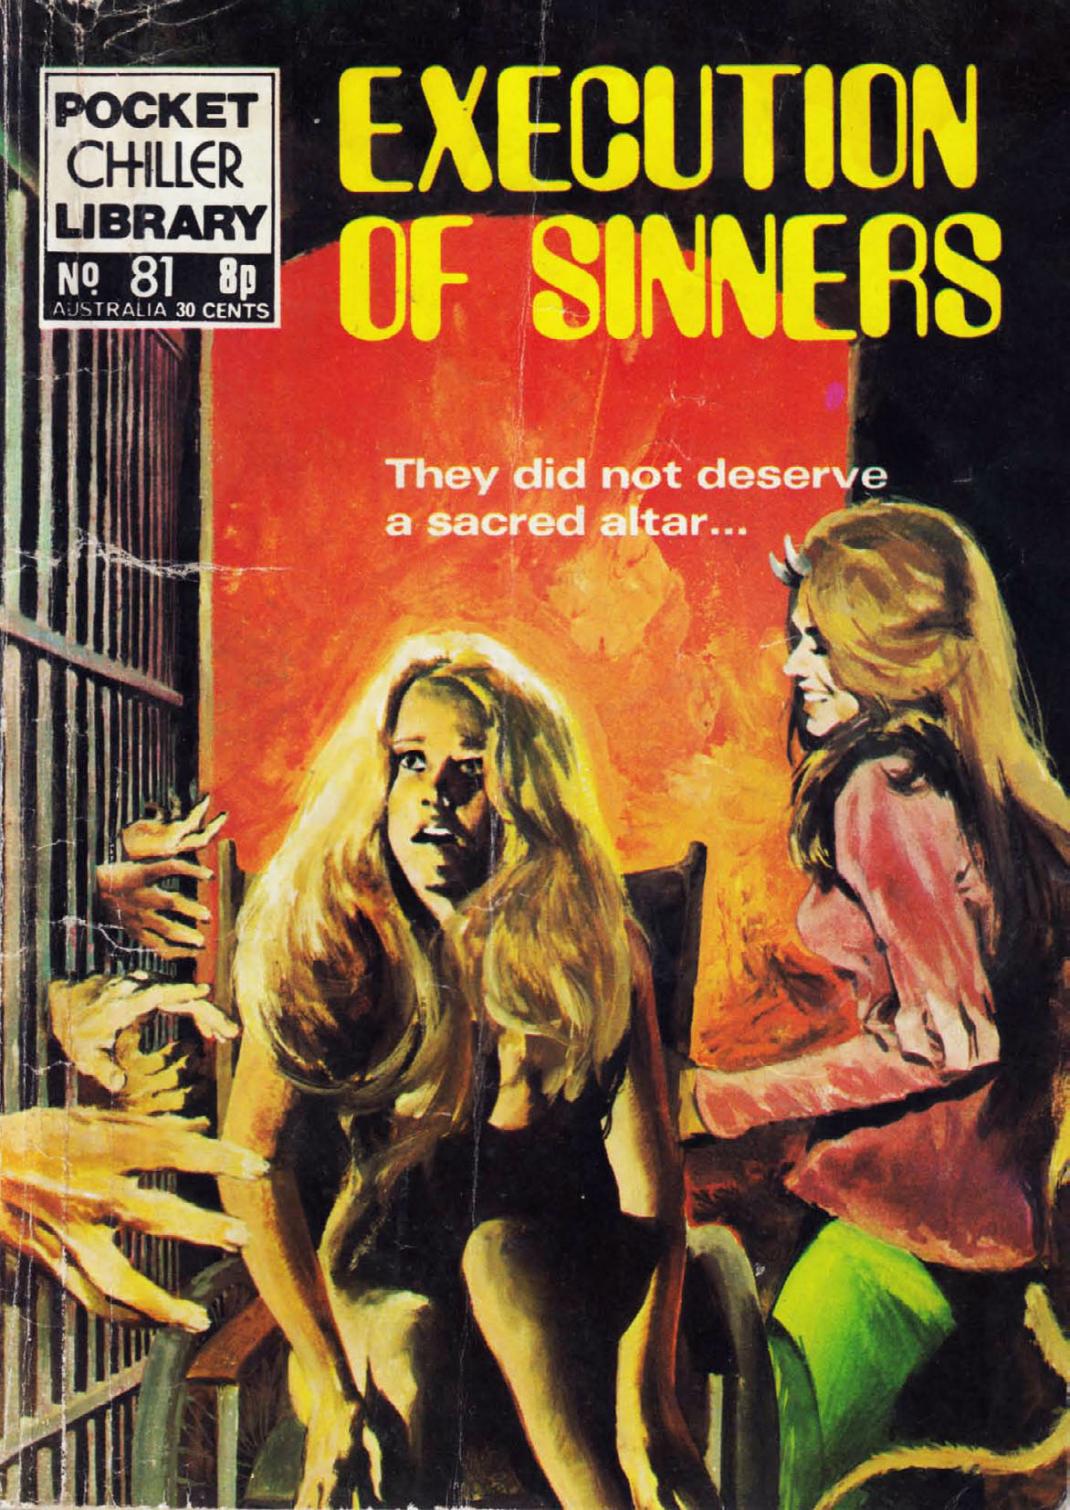 Pocket Chiller library 81 - Execution of sinners